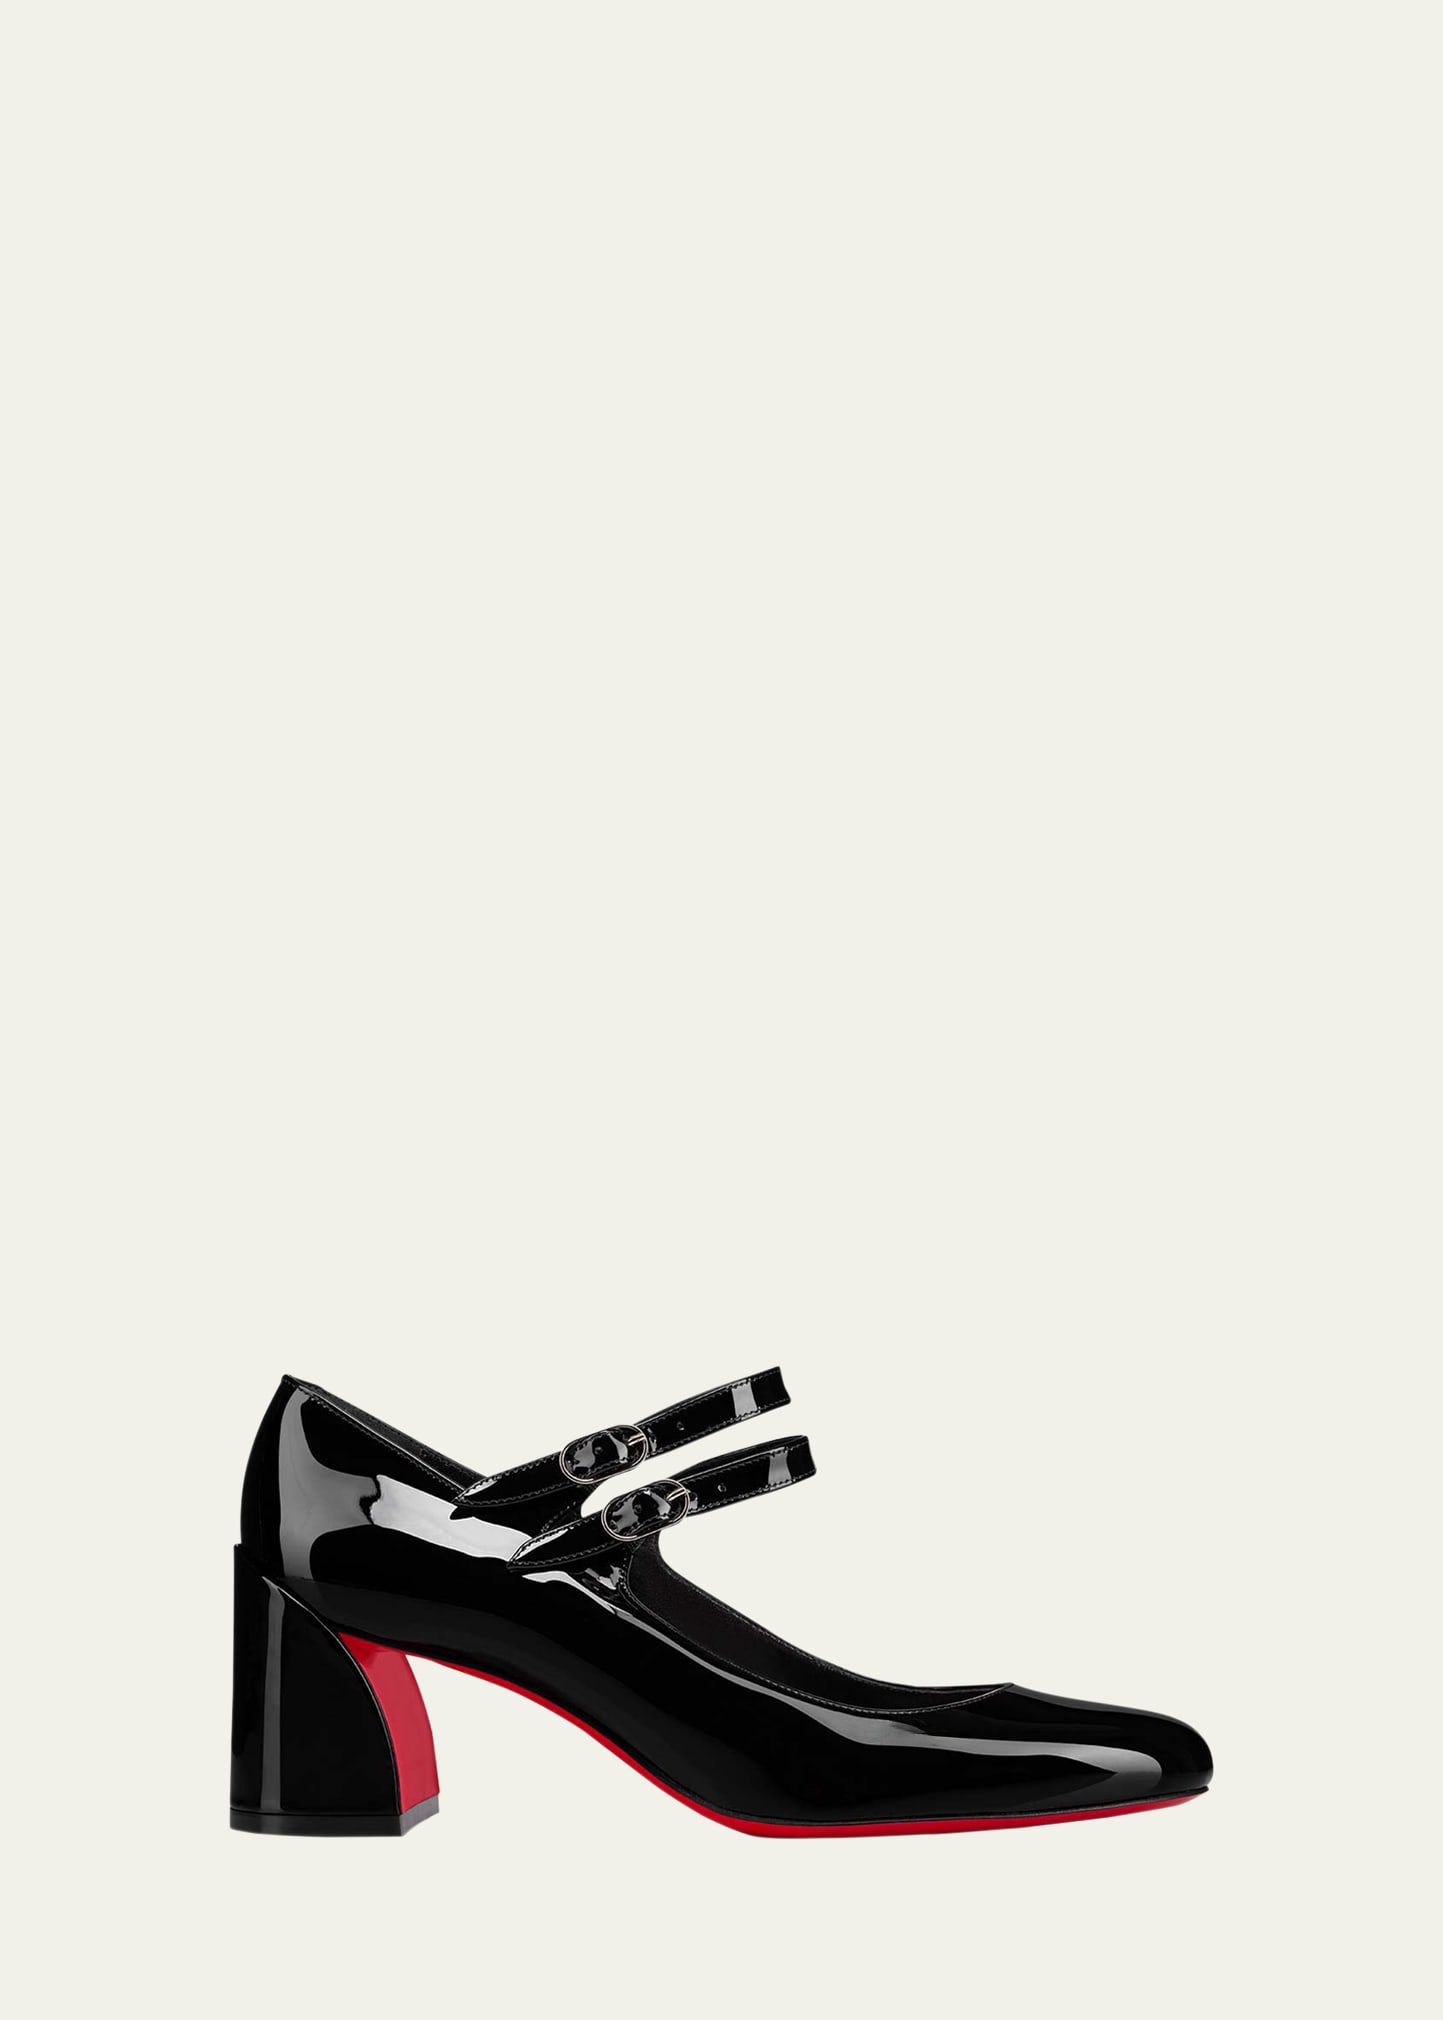 Christian Louboutin Miss Jane Patent Red Sole Pumps